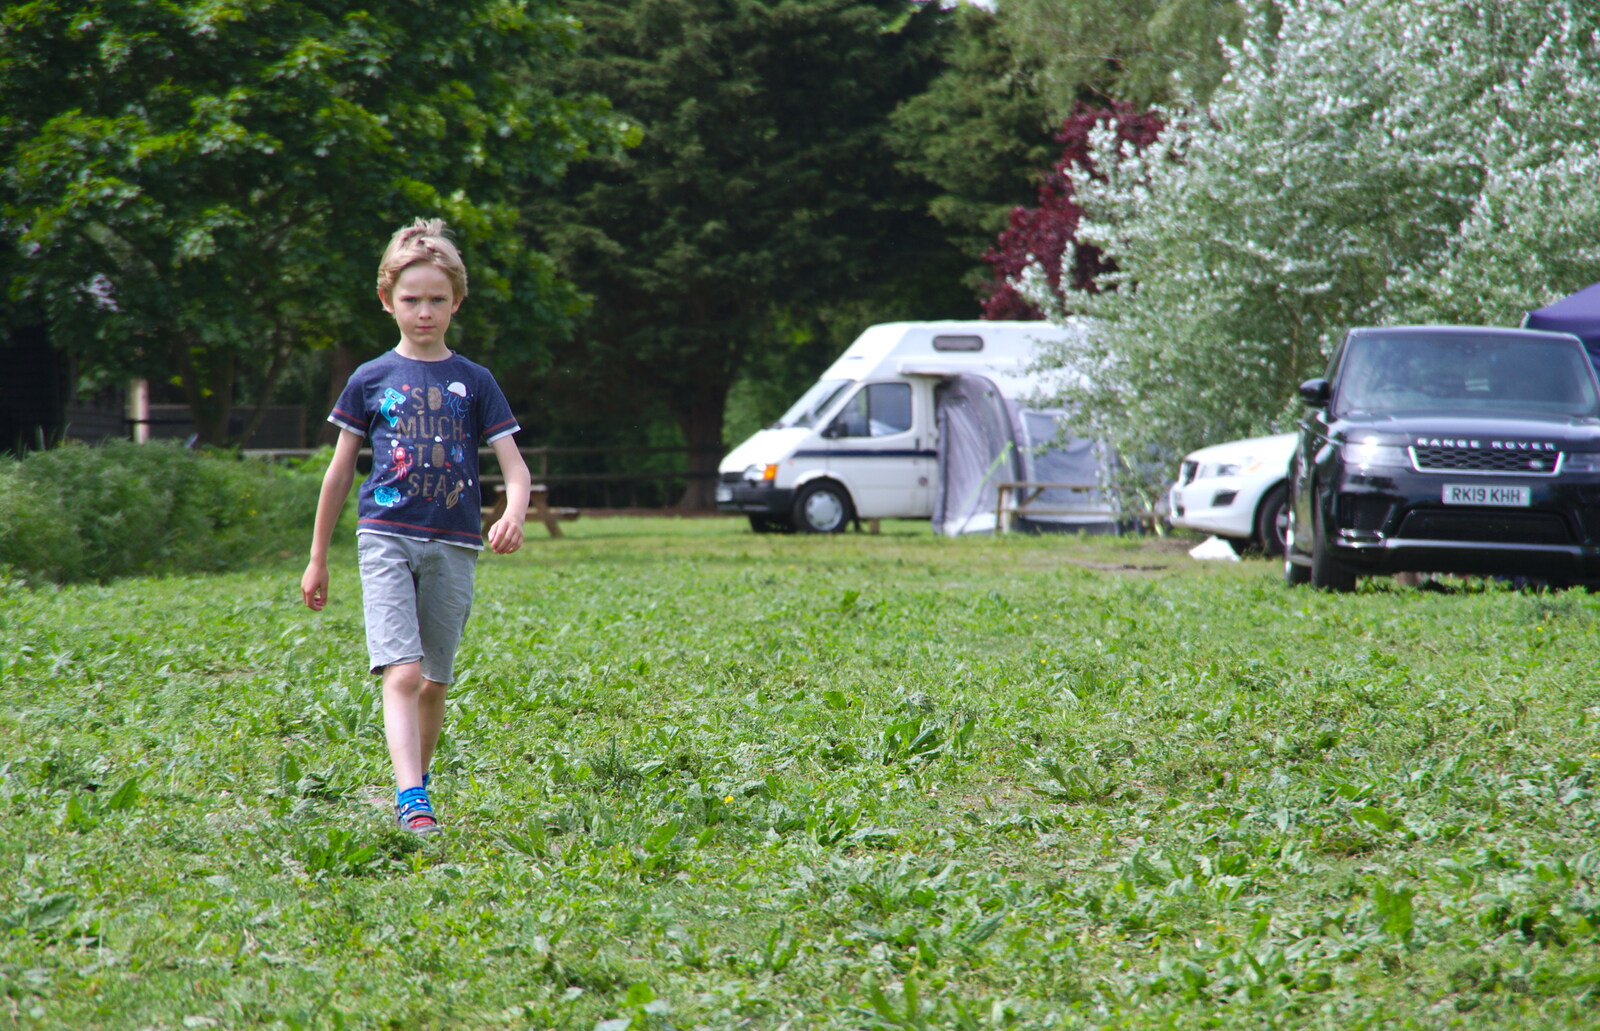 Harry returns from a successful trip to the toilets from Camping at Three Rivers, Geldeston, Norfolk - 1st June 2019